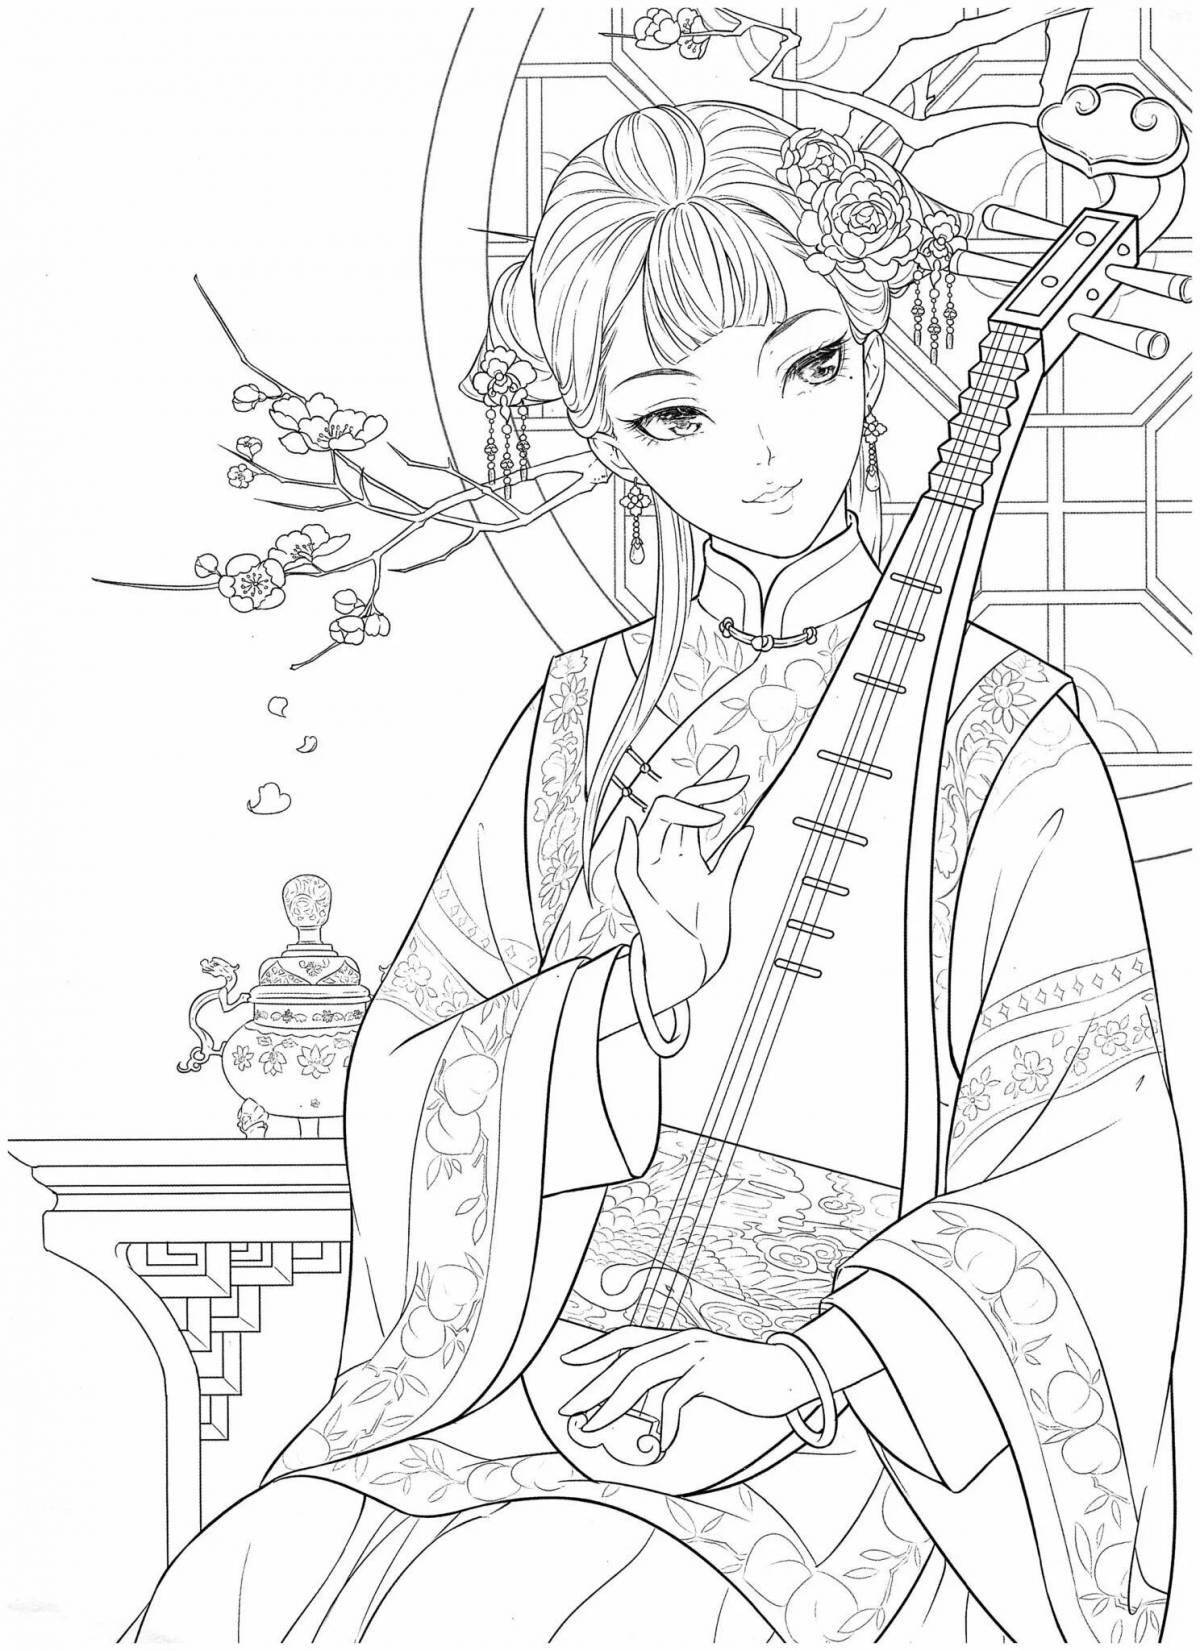 Amazing Chinese girls coloring pages